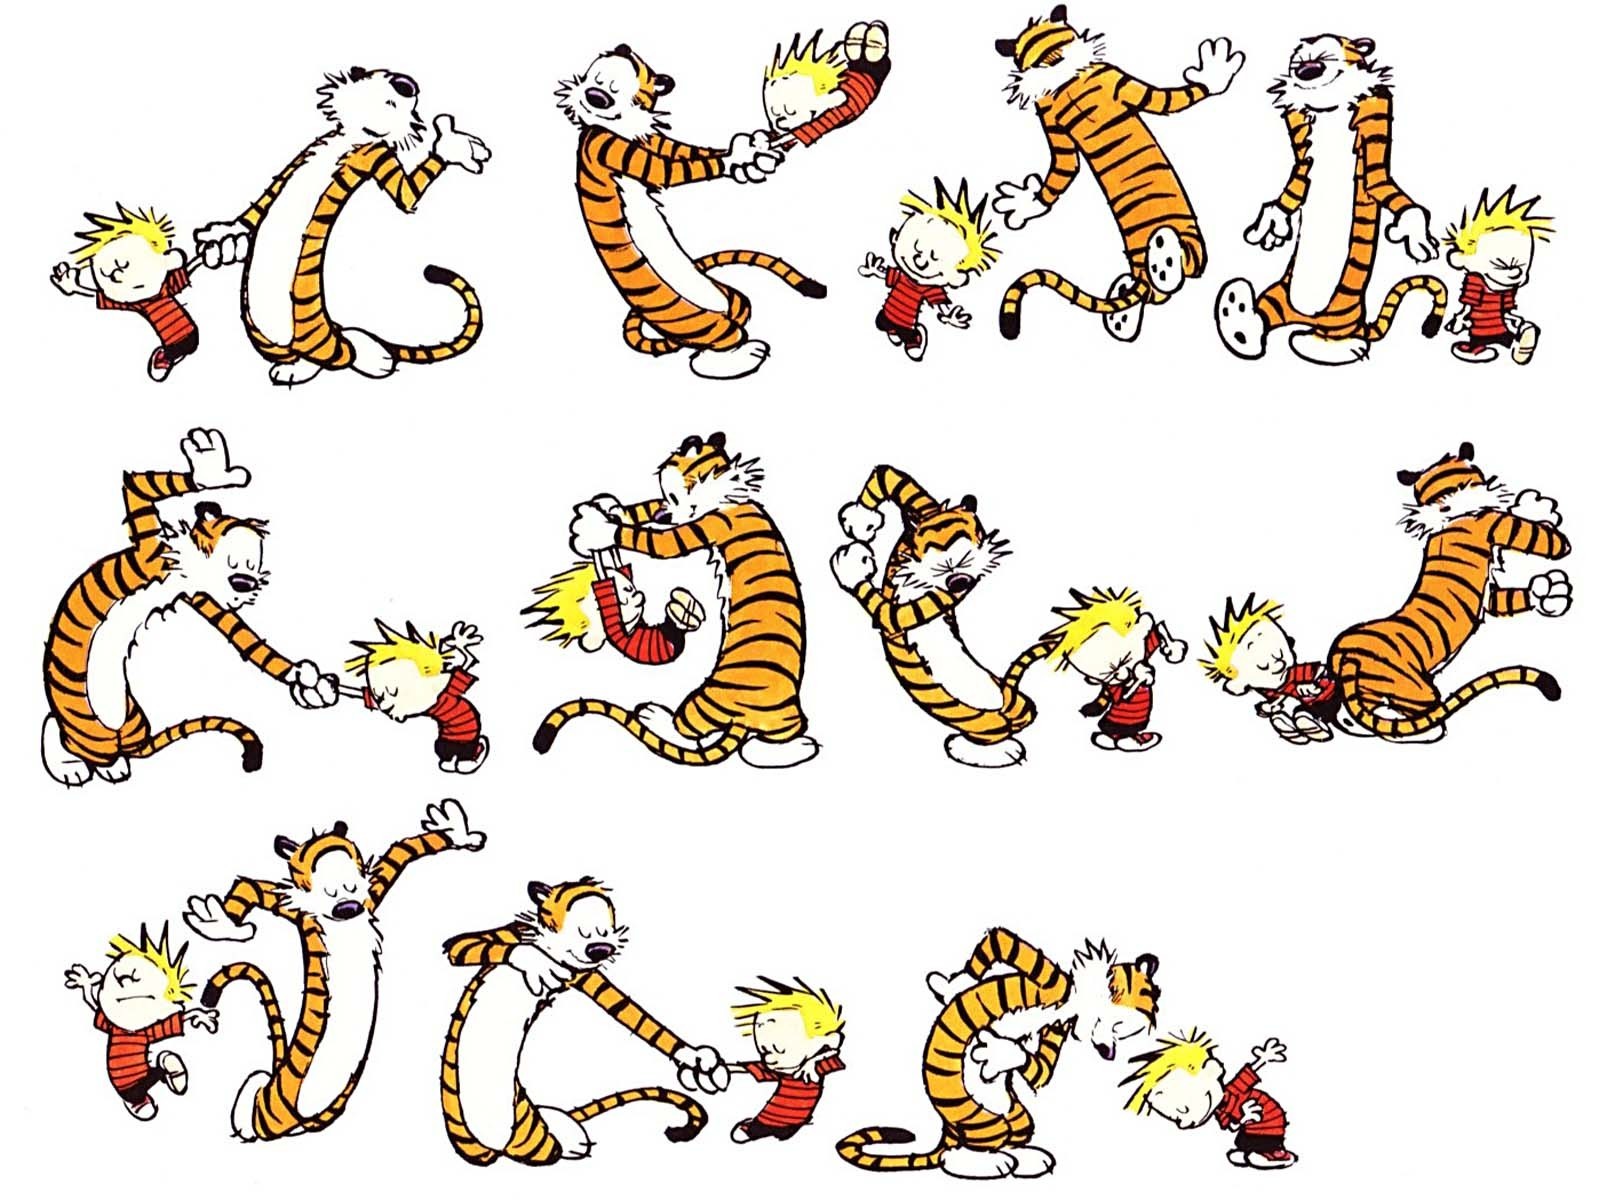 Reasons Your Children Should Read Calvin And Hobbes   Nerdy With    